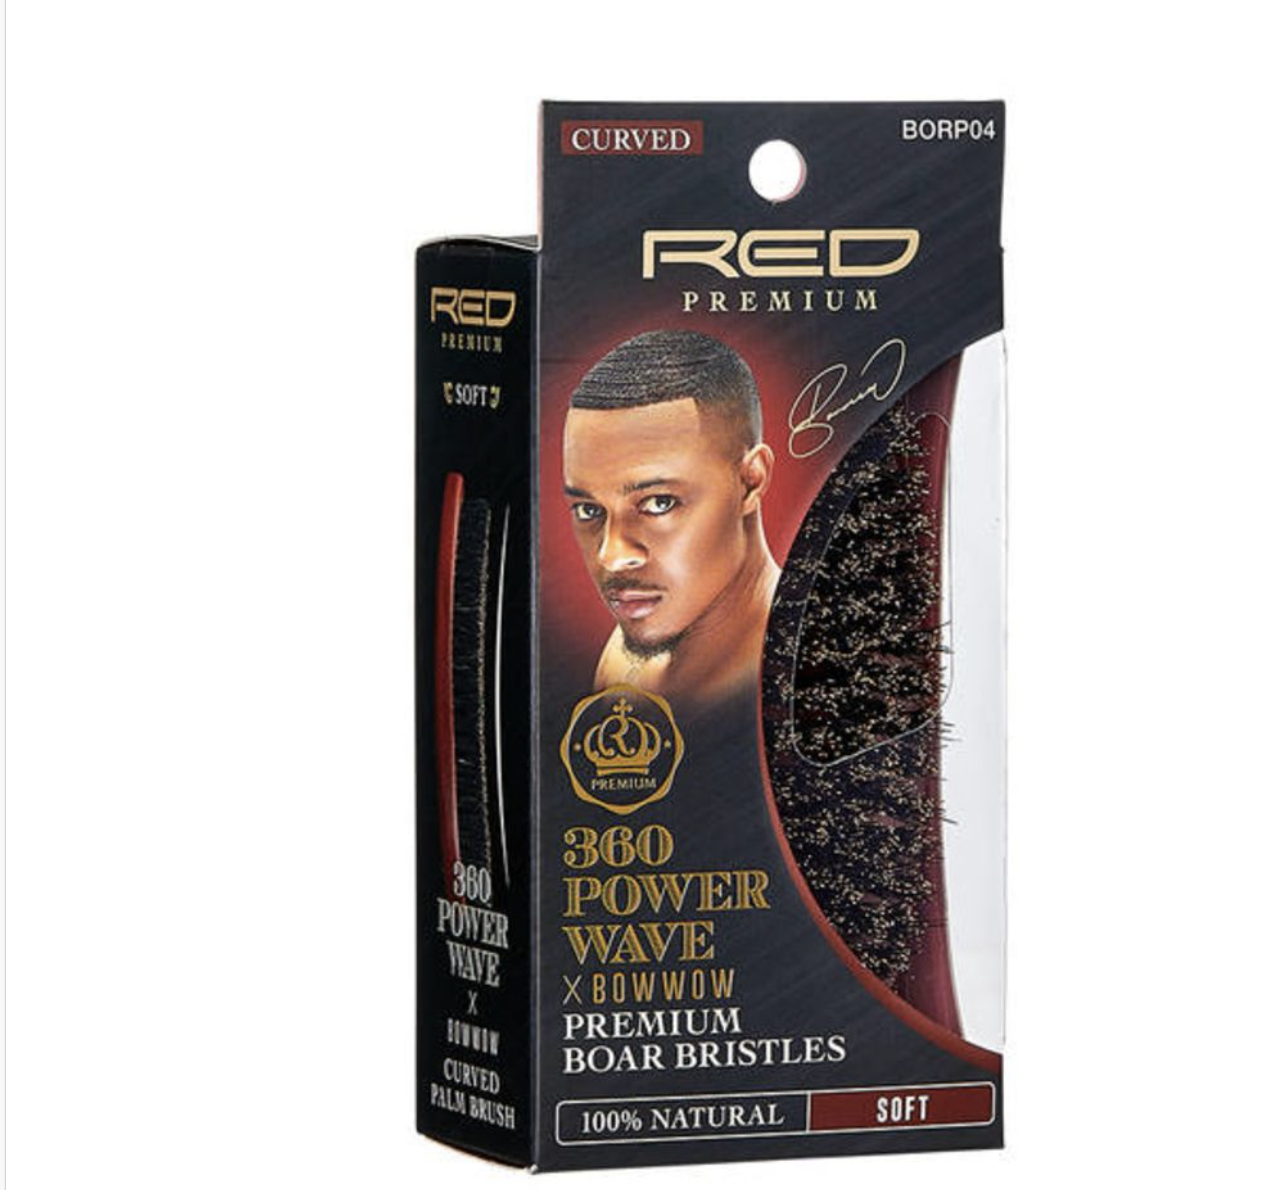 RED PREMIUM | 360 Power Wave Club Boar Brush Curved (Soft) BORP04 - BPolished Beauty Supply